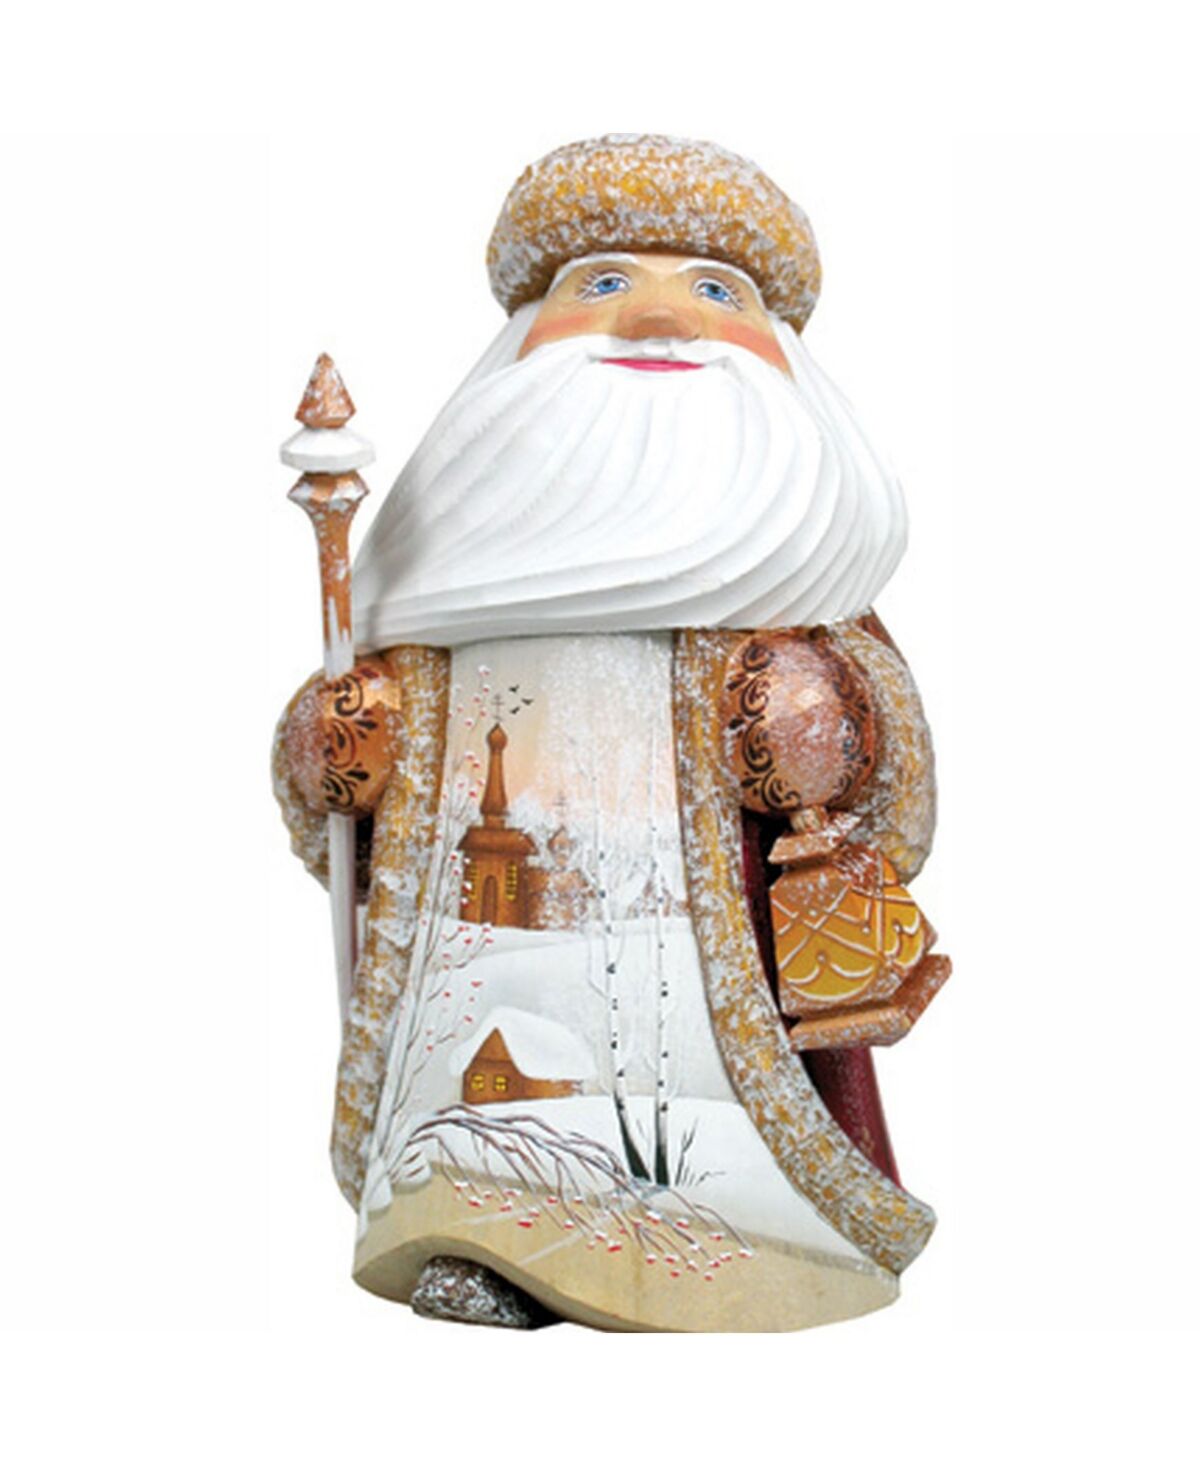 G.DeBrekht Woodcarved and Hand Painted Santa Countryside Guiding Light Figurine - Multi